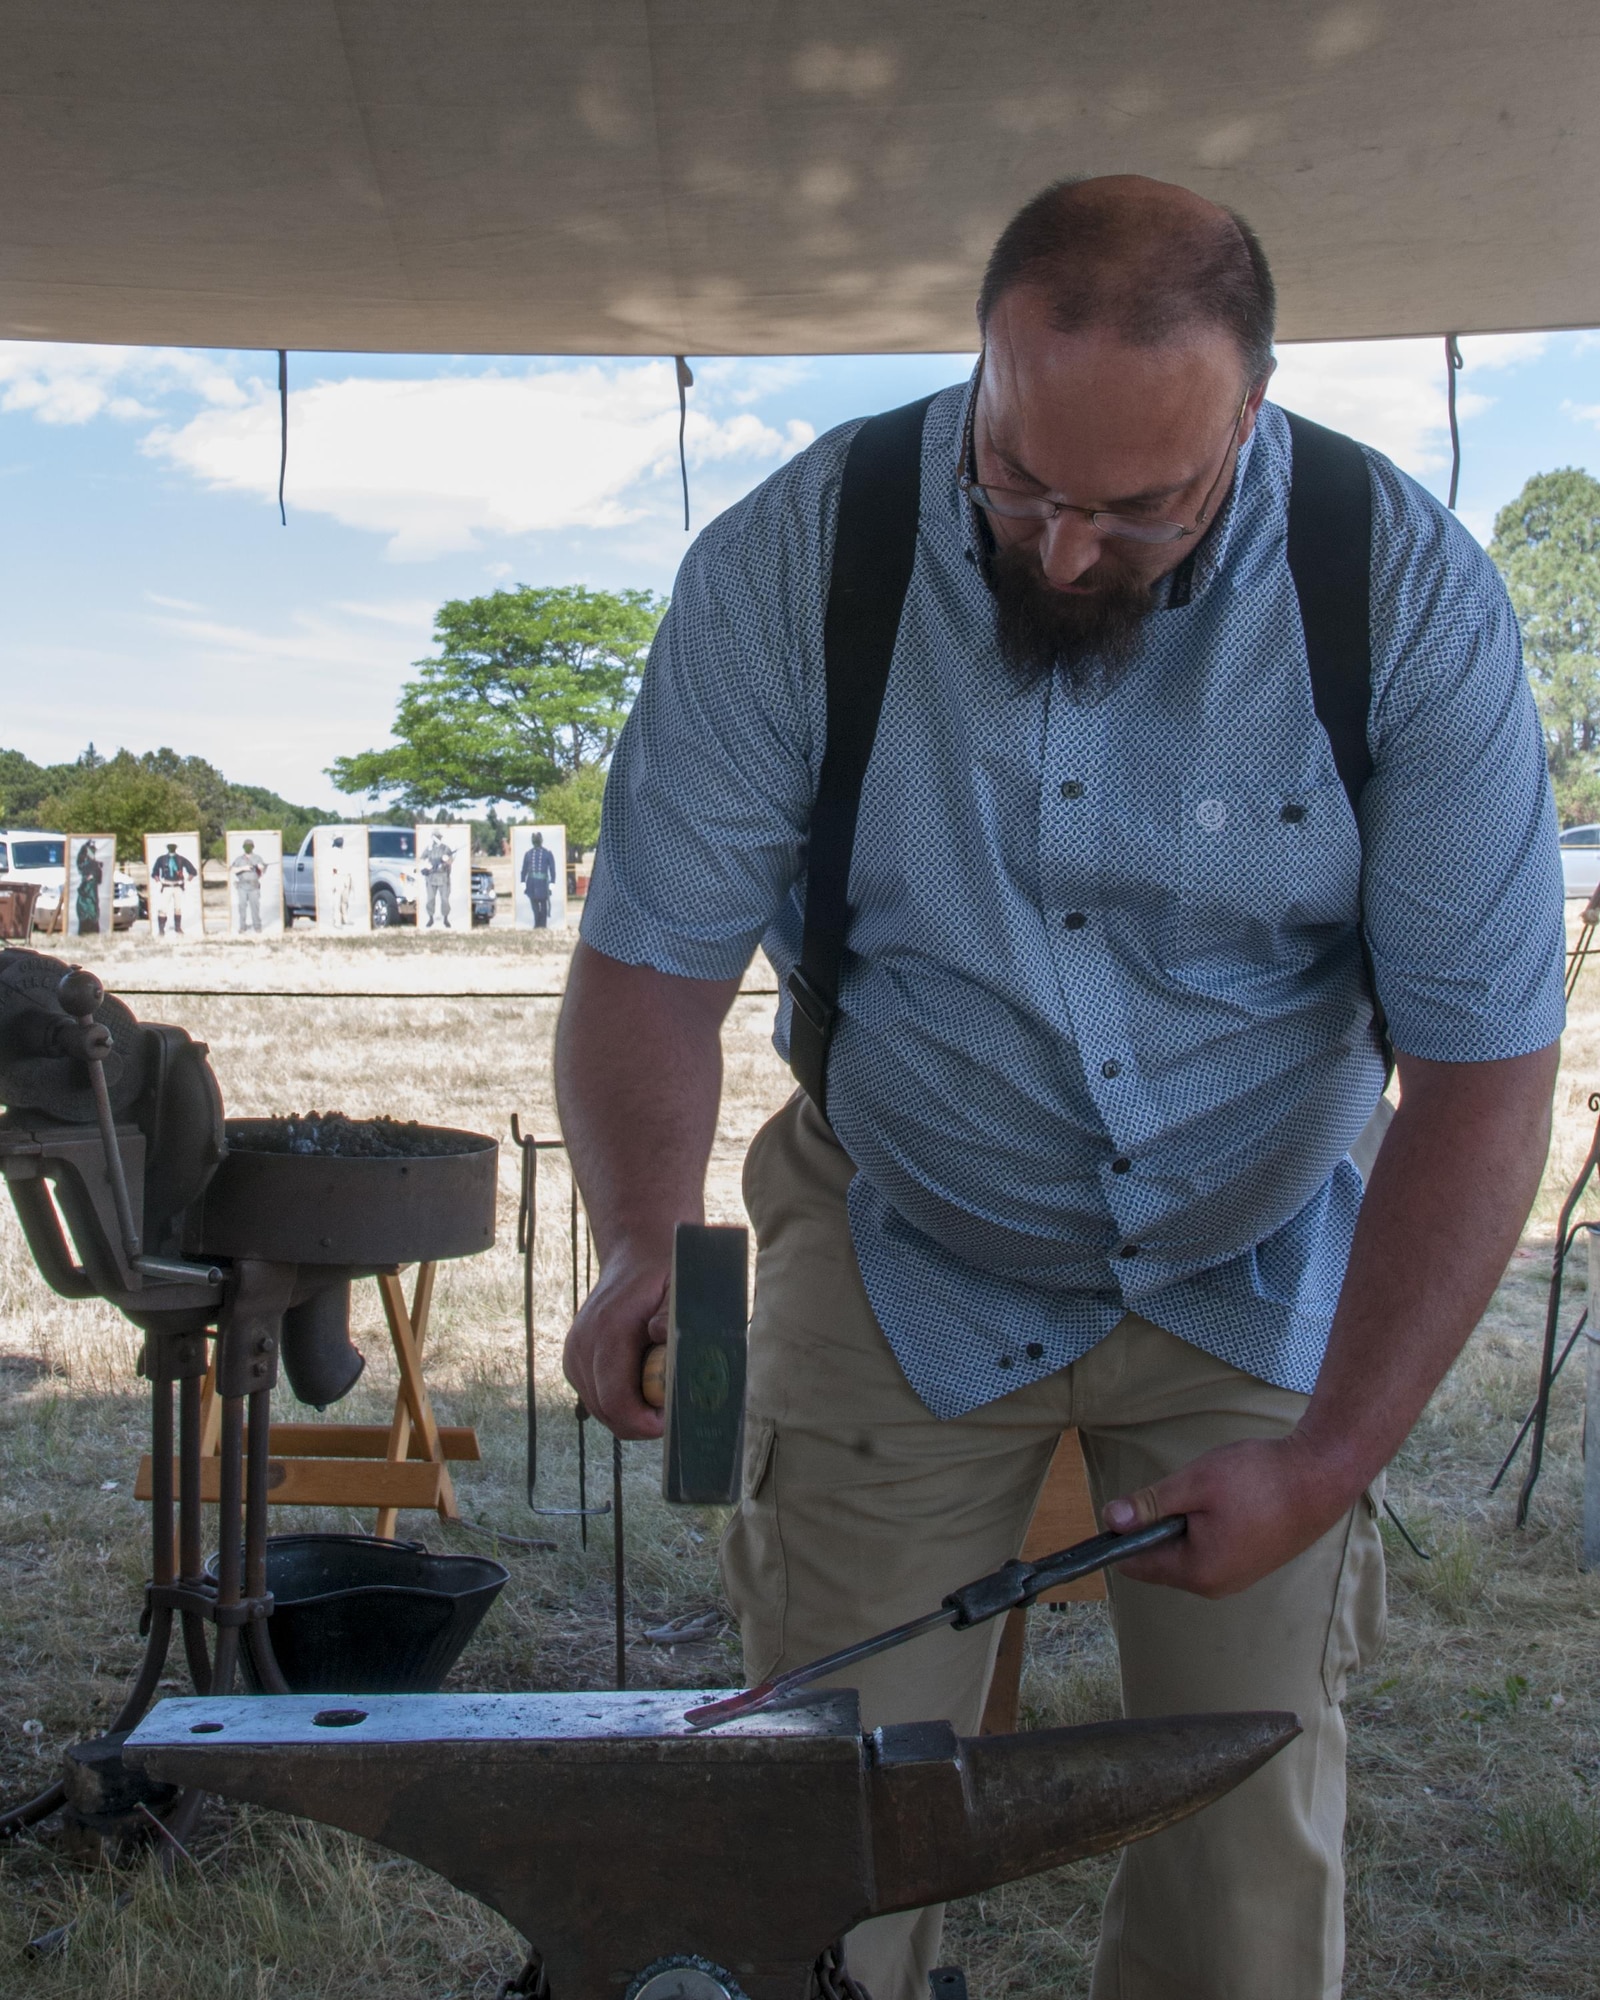 Retired Staff Sgt. Andrew Nofzinger hammers a new decorative hook July 22, 2016, during Fort D.A. Russell Days, the annual F.E. Warren Air Force Base, Wyo., open house. Blacksmithing was a vital survival skill for settlers of the American frontier. (U.S. Air Force photo by Senior Airman Jason Wiese)